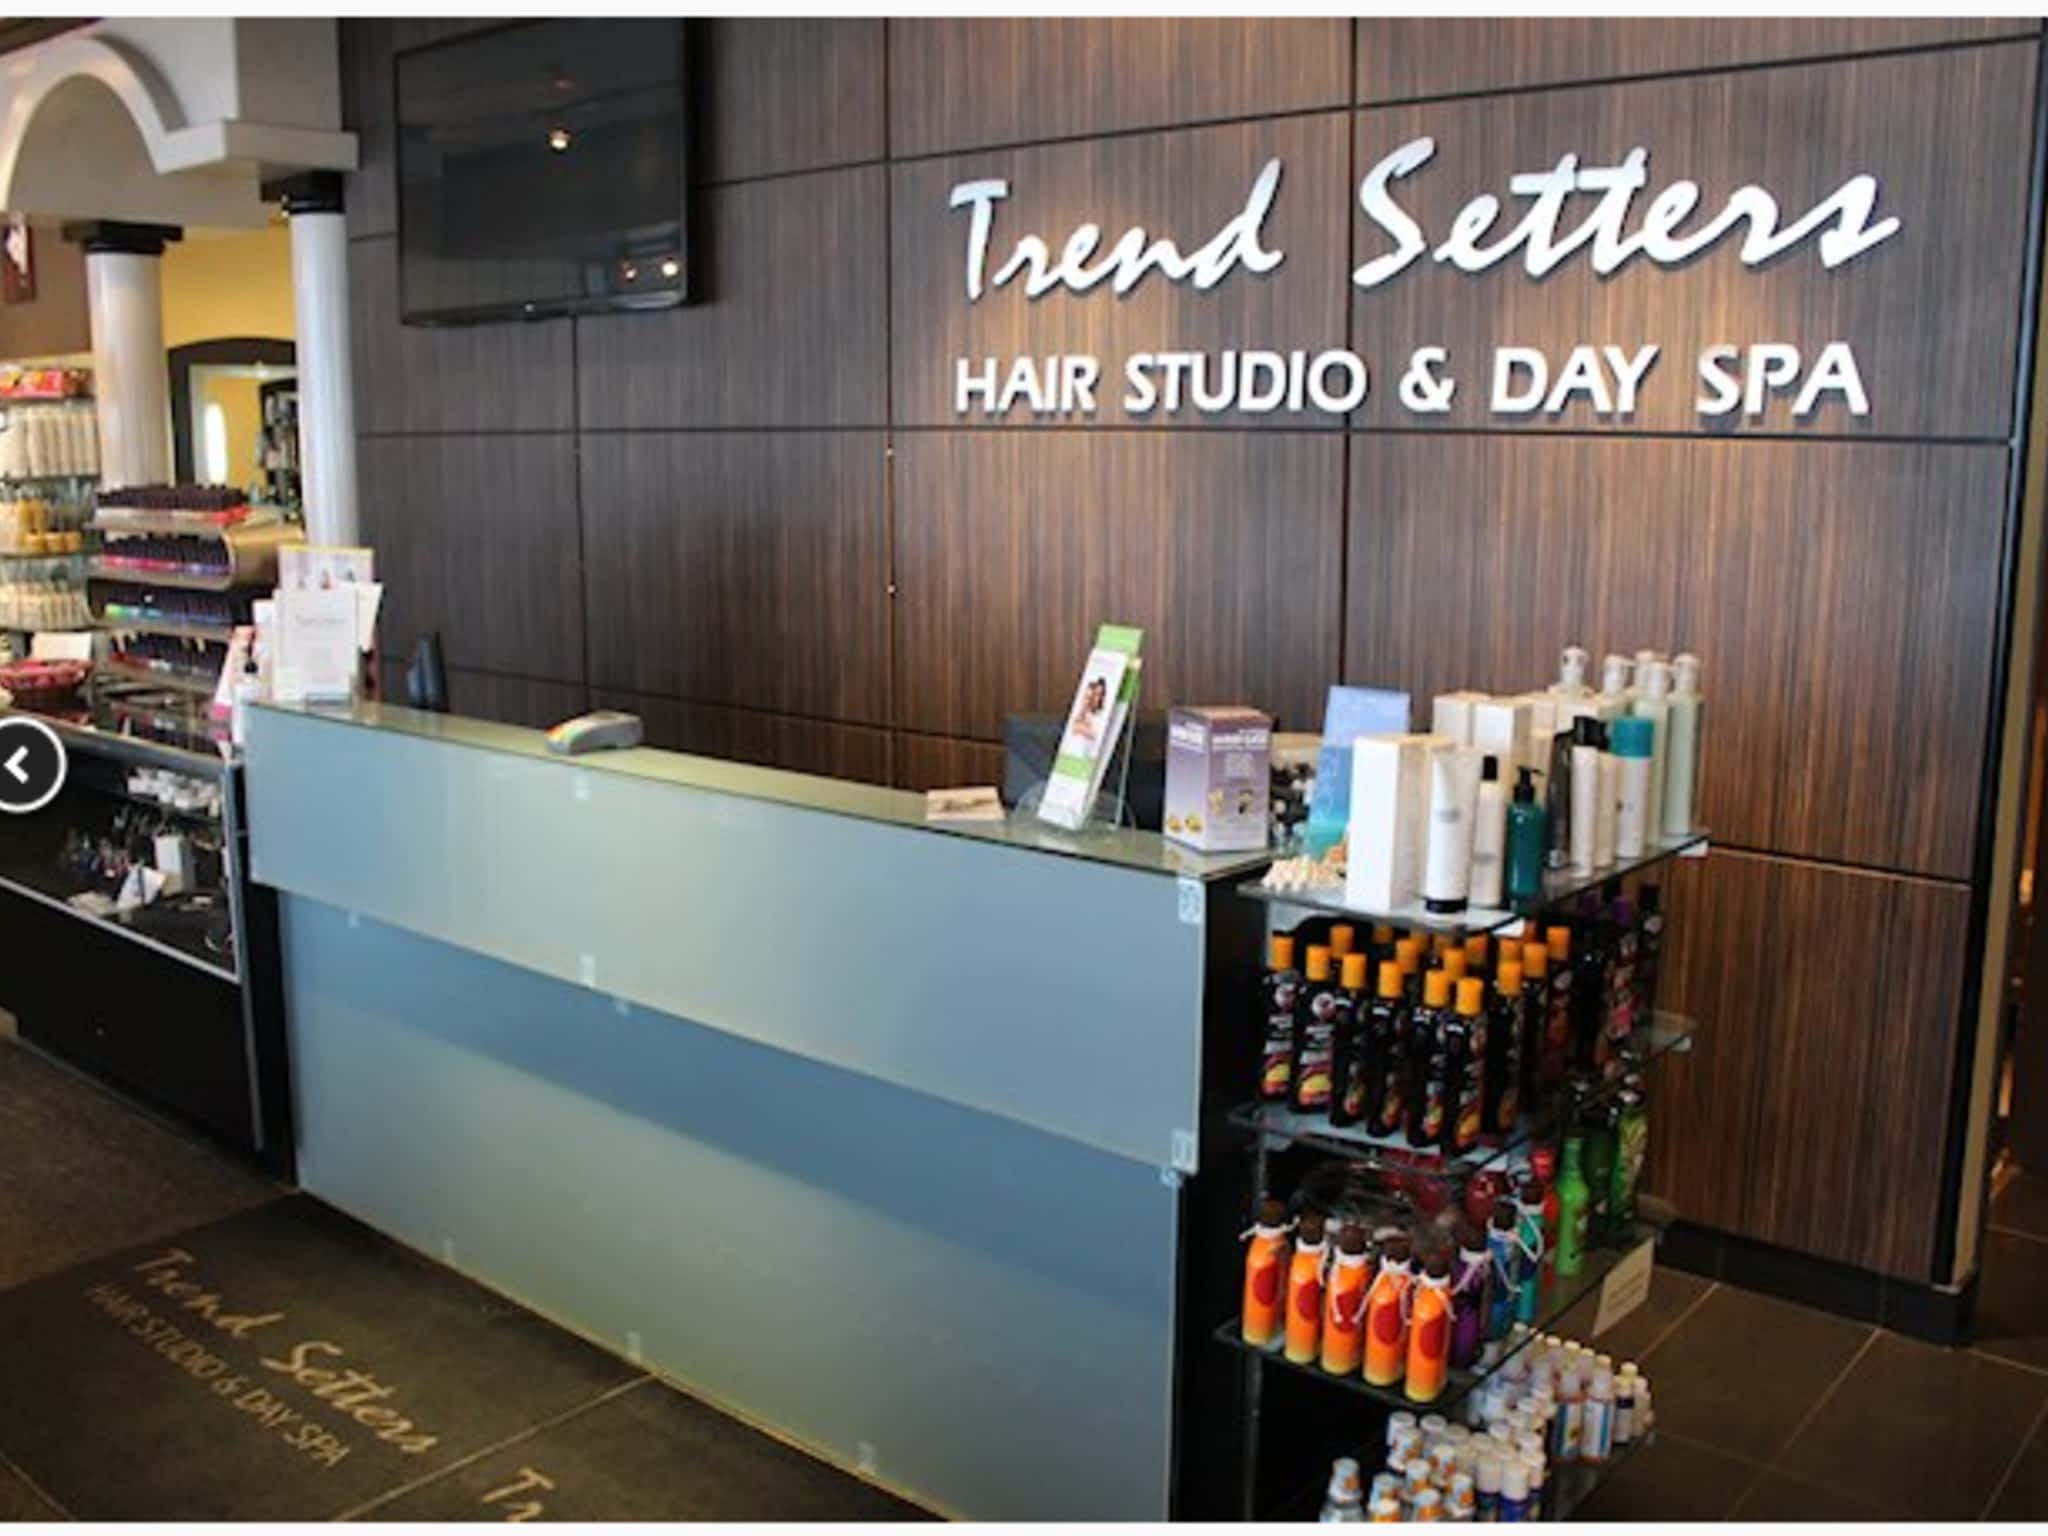 photo Trend Setters Hair Studio & Day Spa